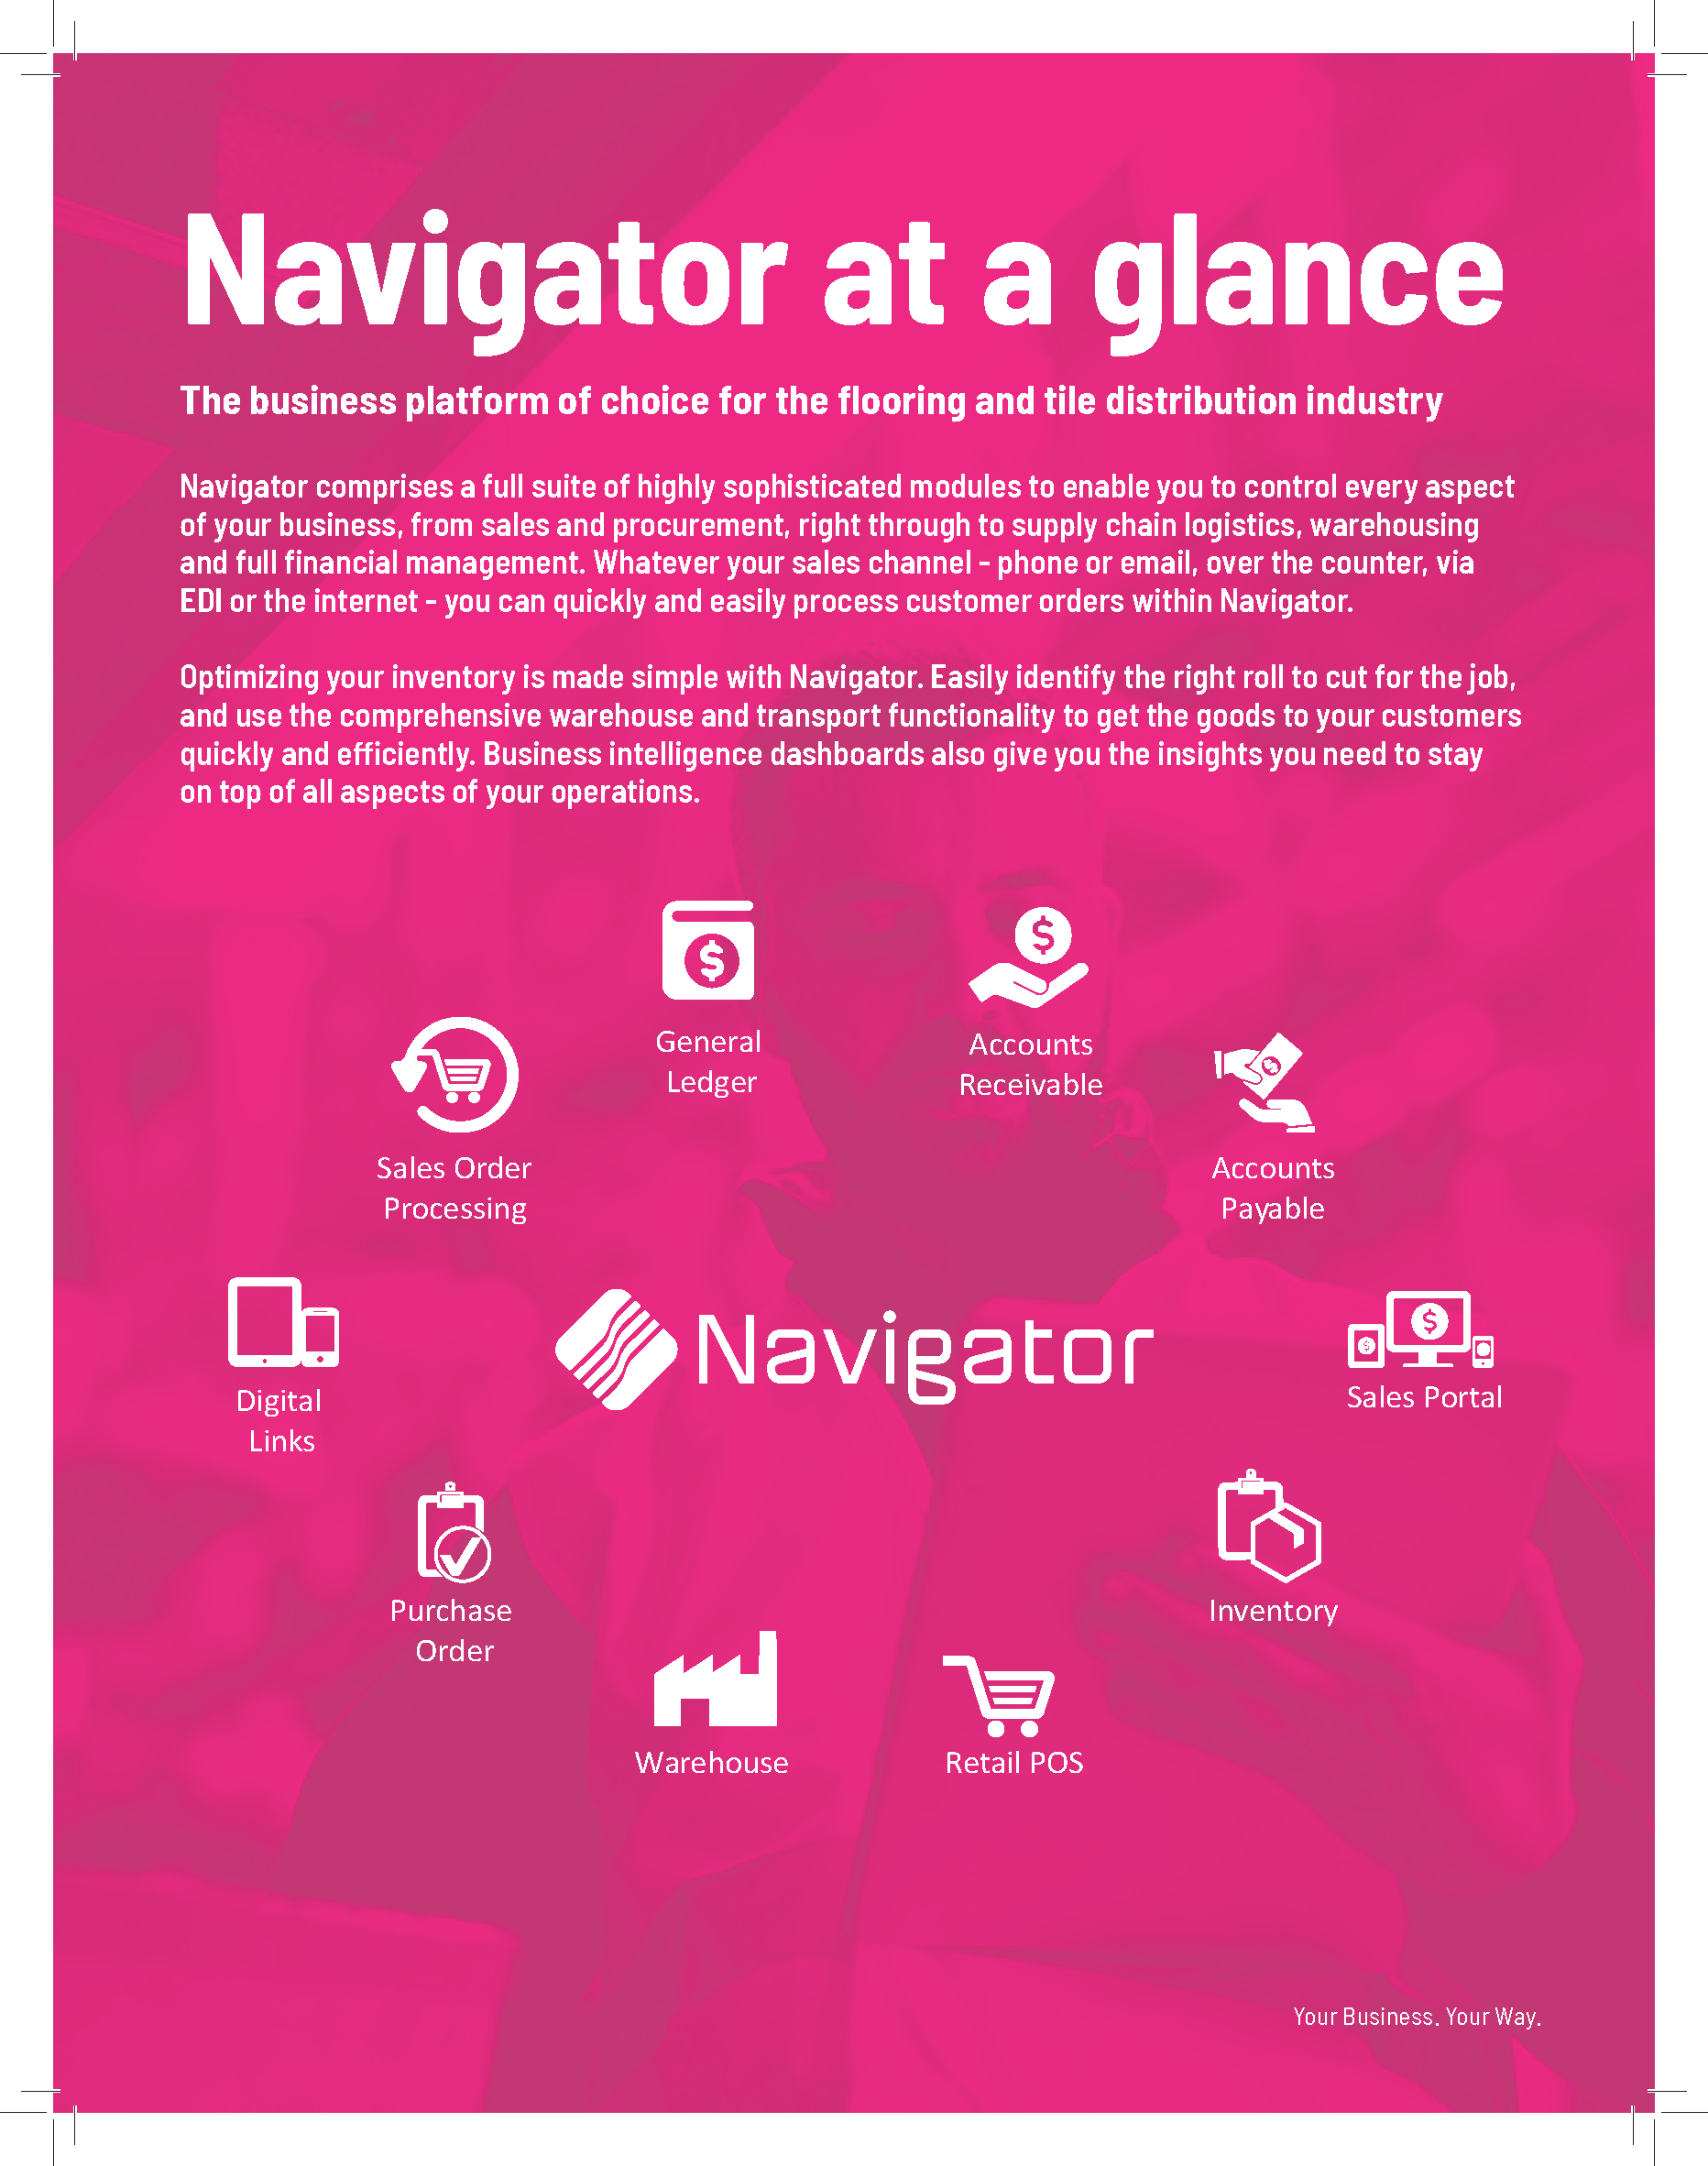 Manage your flooring or tile distribution business with Navigator